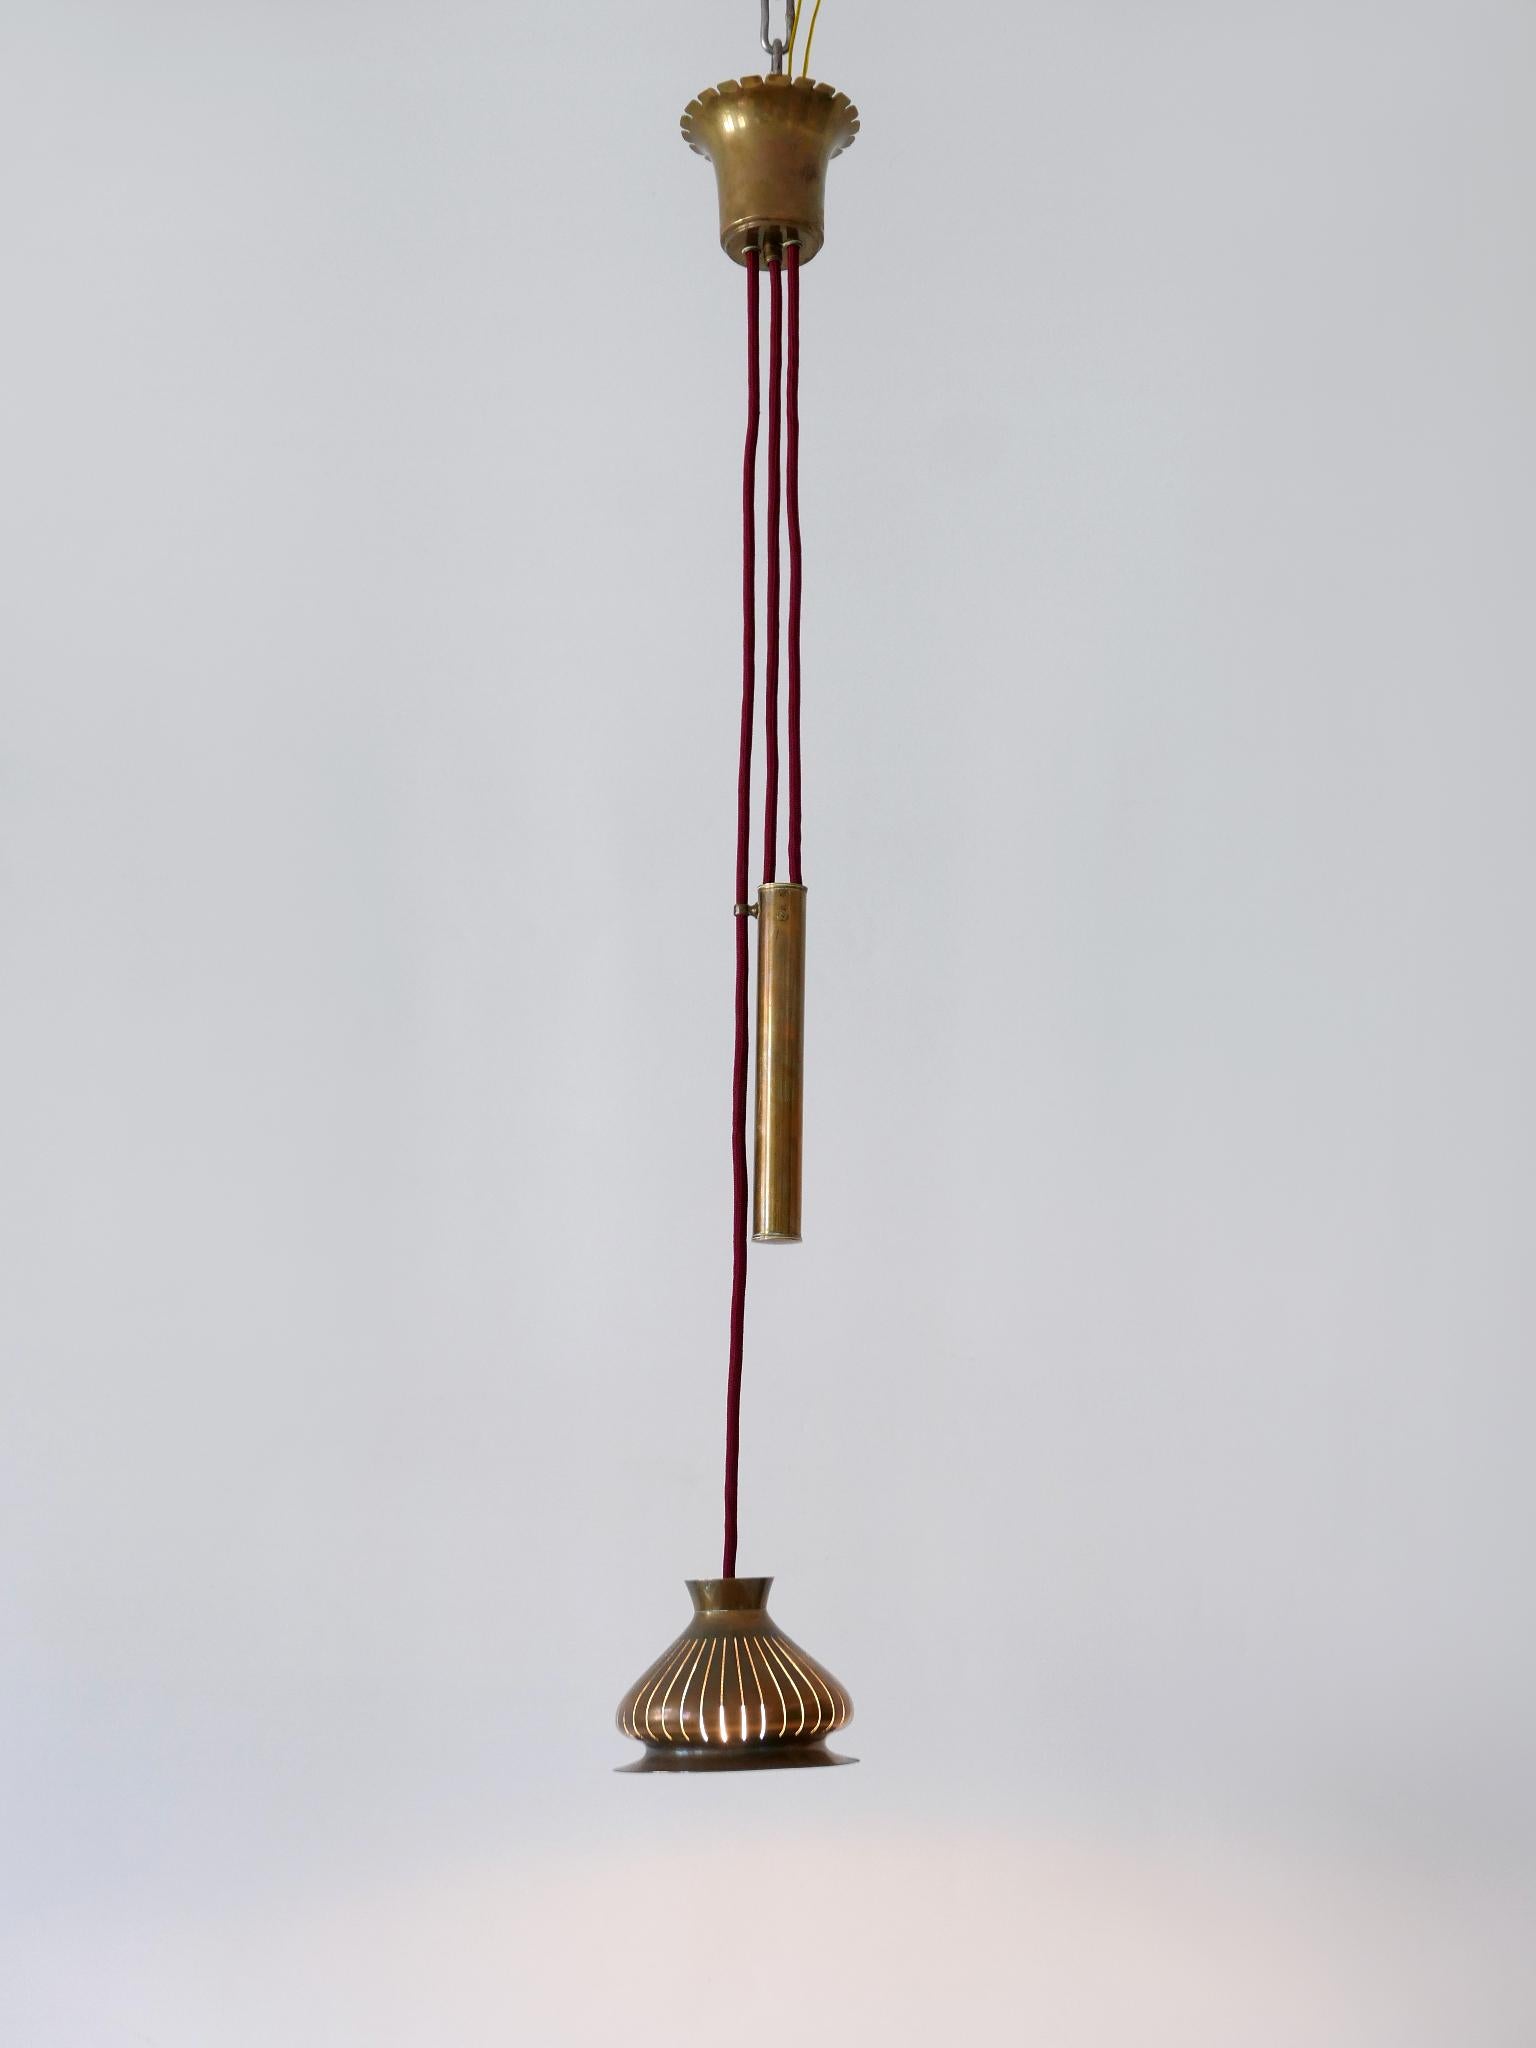 Extremely Rare Mid Century Modern Counterweight Brass Pendant Lamp Germany 1950s For Sale 6